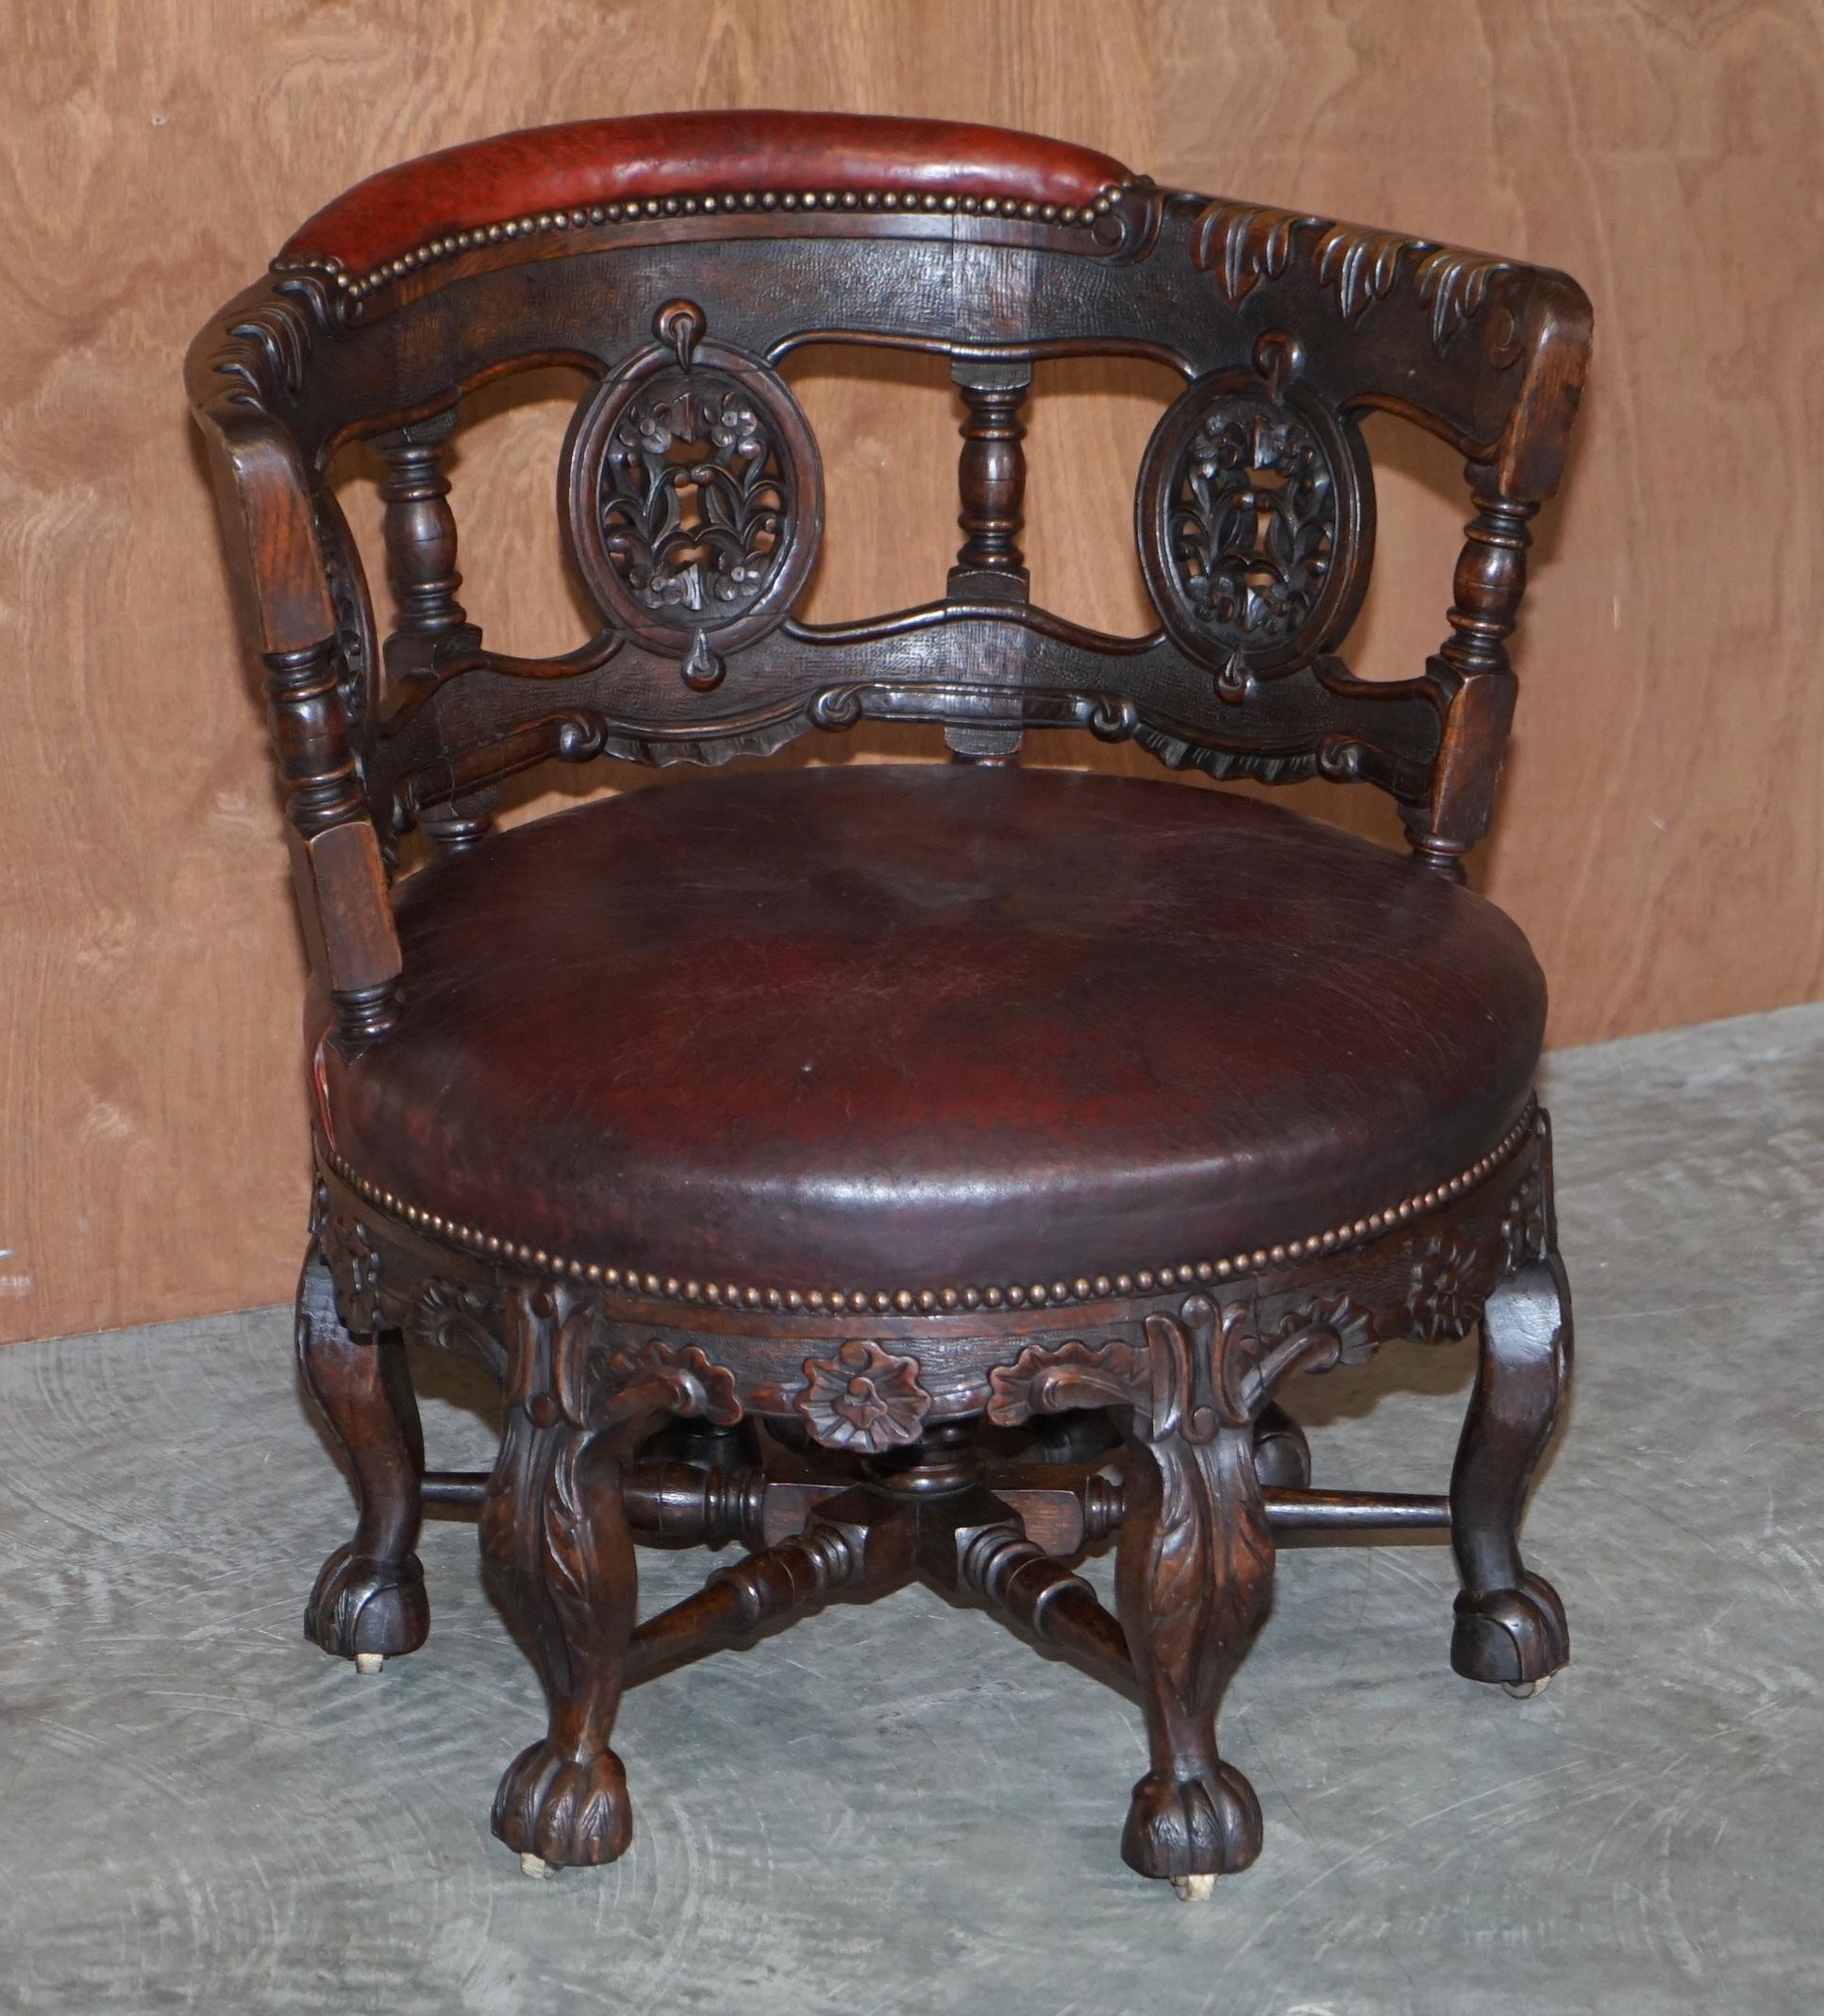 We are delighted to offer for sale highly decorative and exquisitely made Antique Victorian circa 1870 Burgermeister chair based on a 17th design

A very well made and decorative chair, it is heavily carved from top to bottom with six legs all of